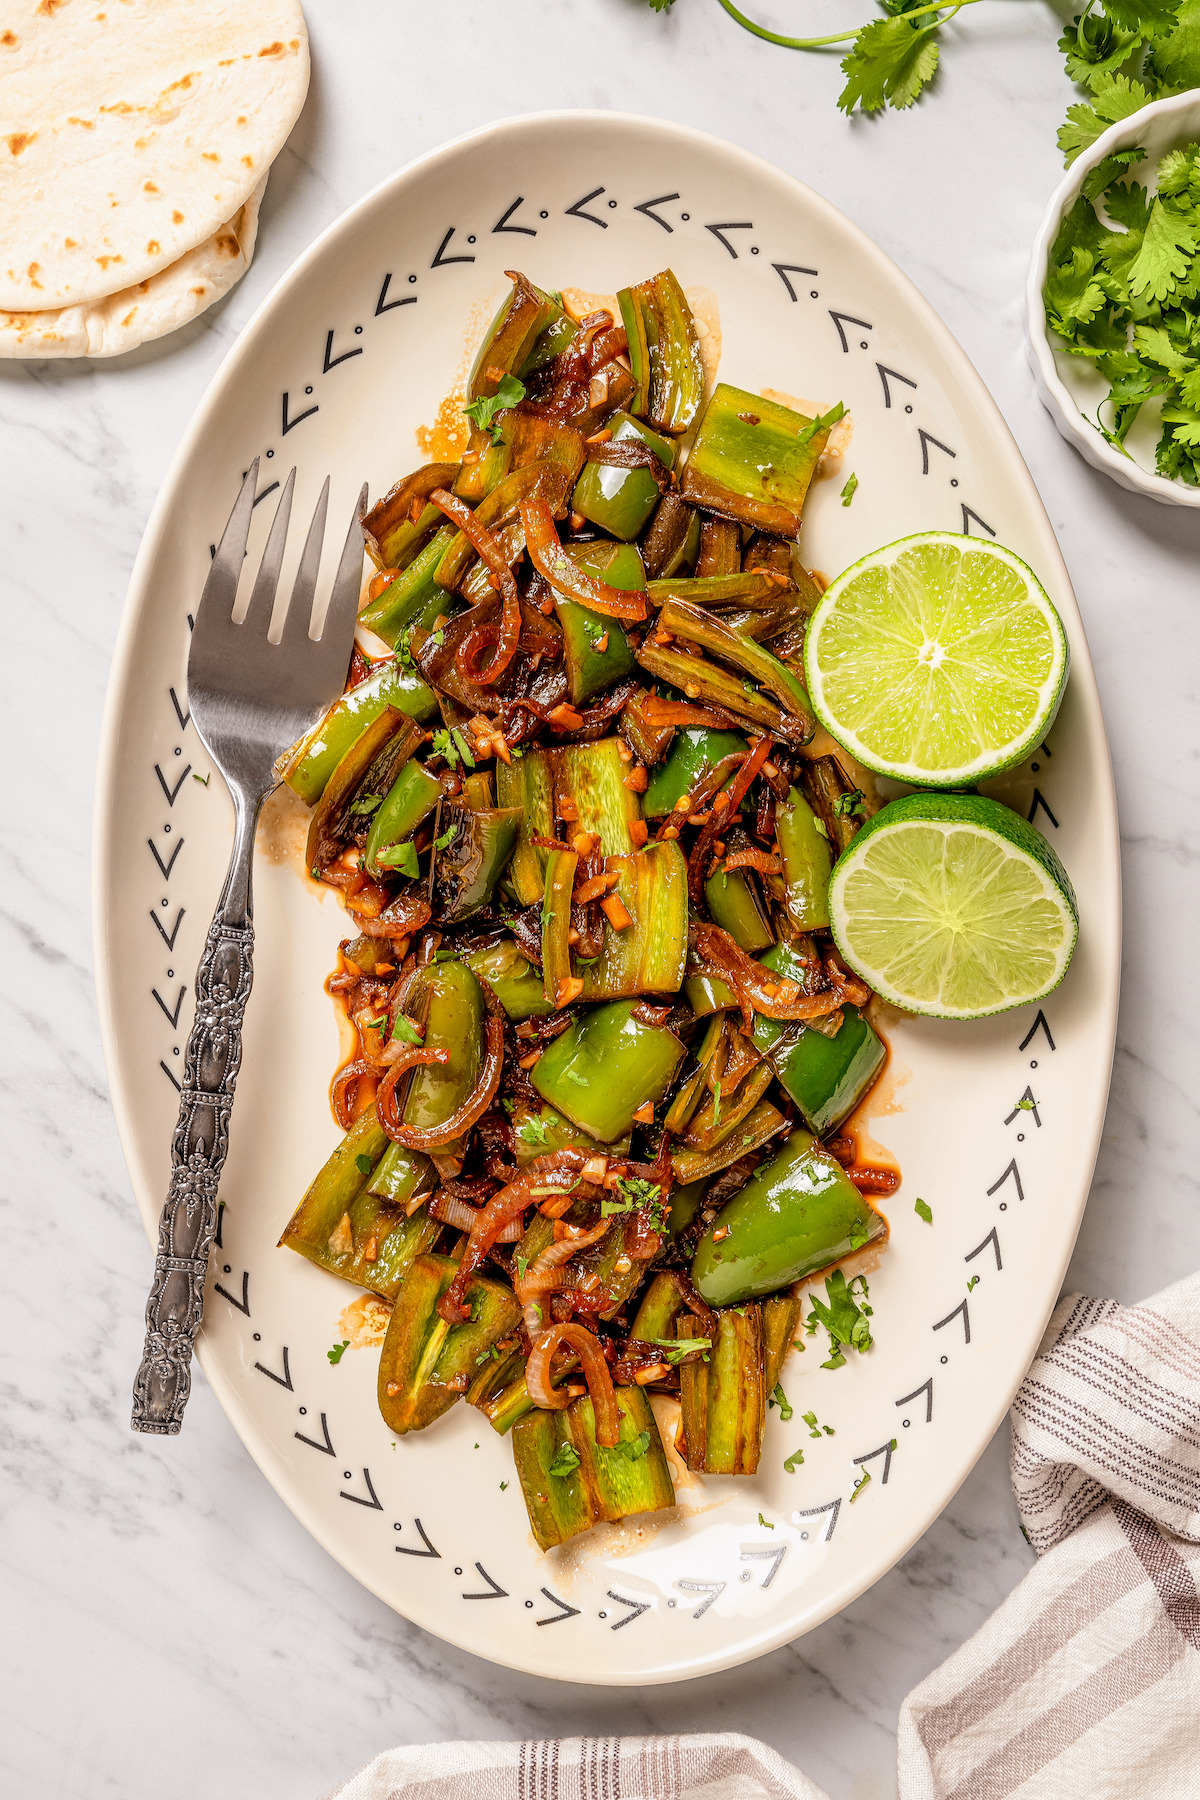 Chiles toreados with lime wedges on the side.